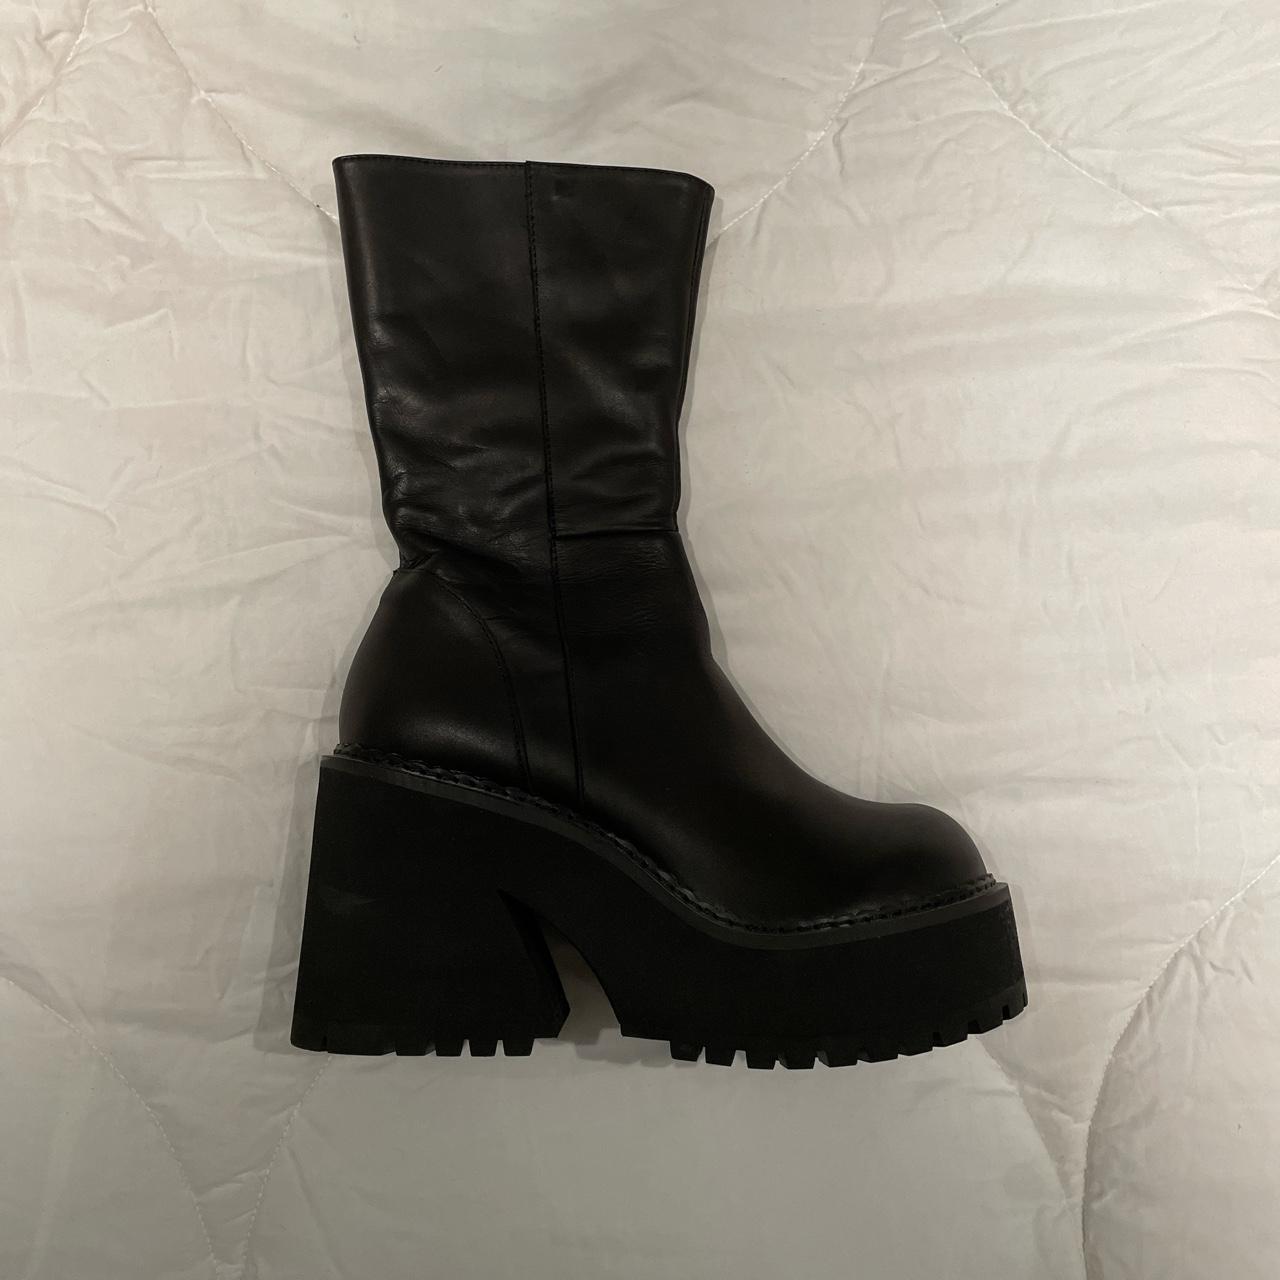 amazing black parker boots from unif! 🕷 round toe,... - Depop